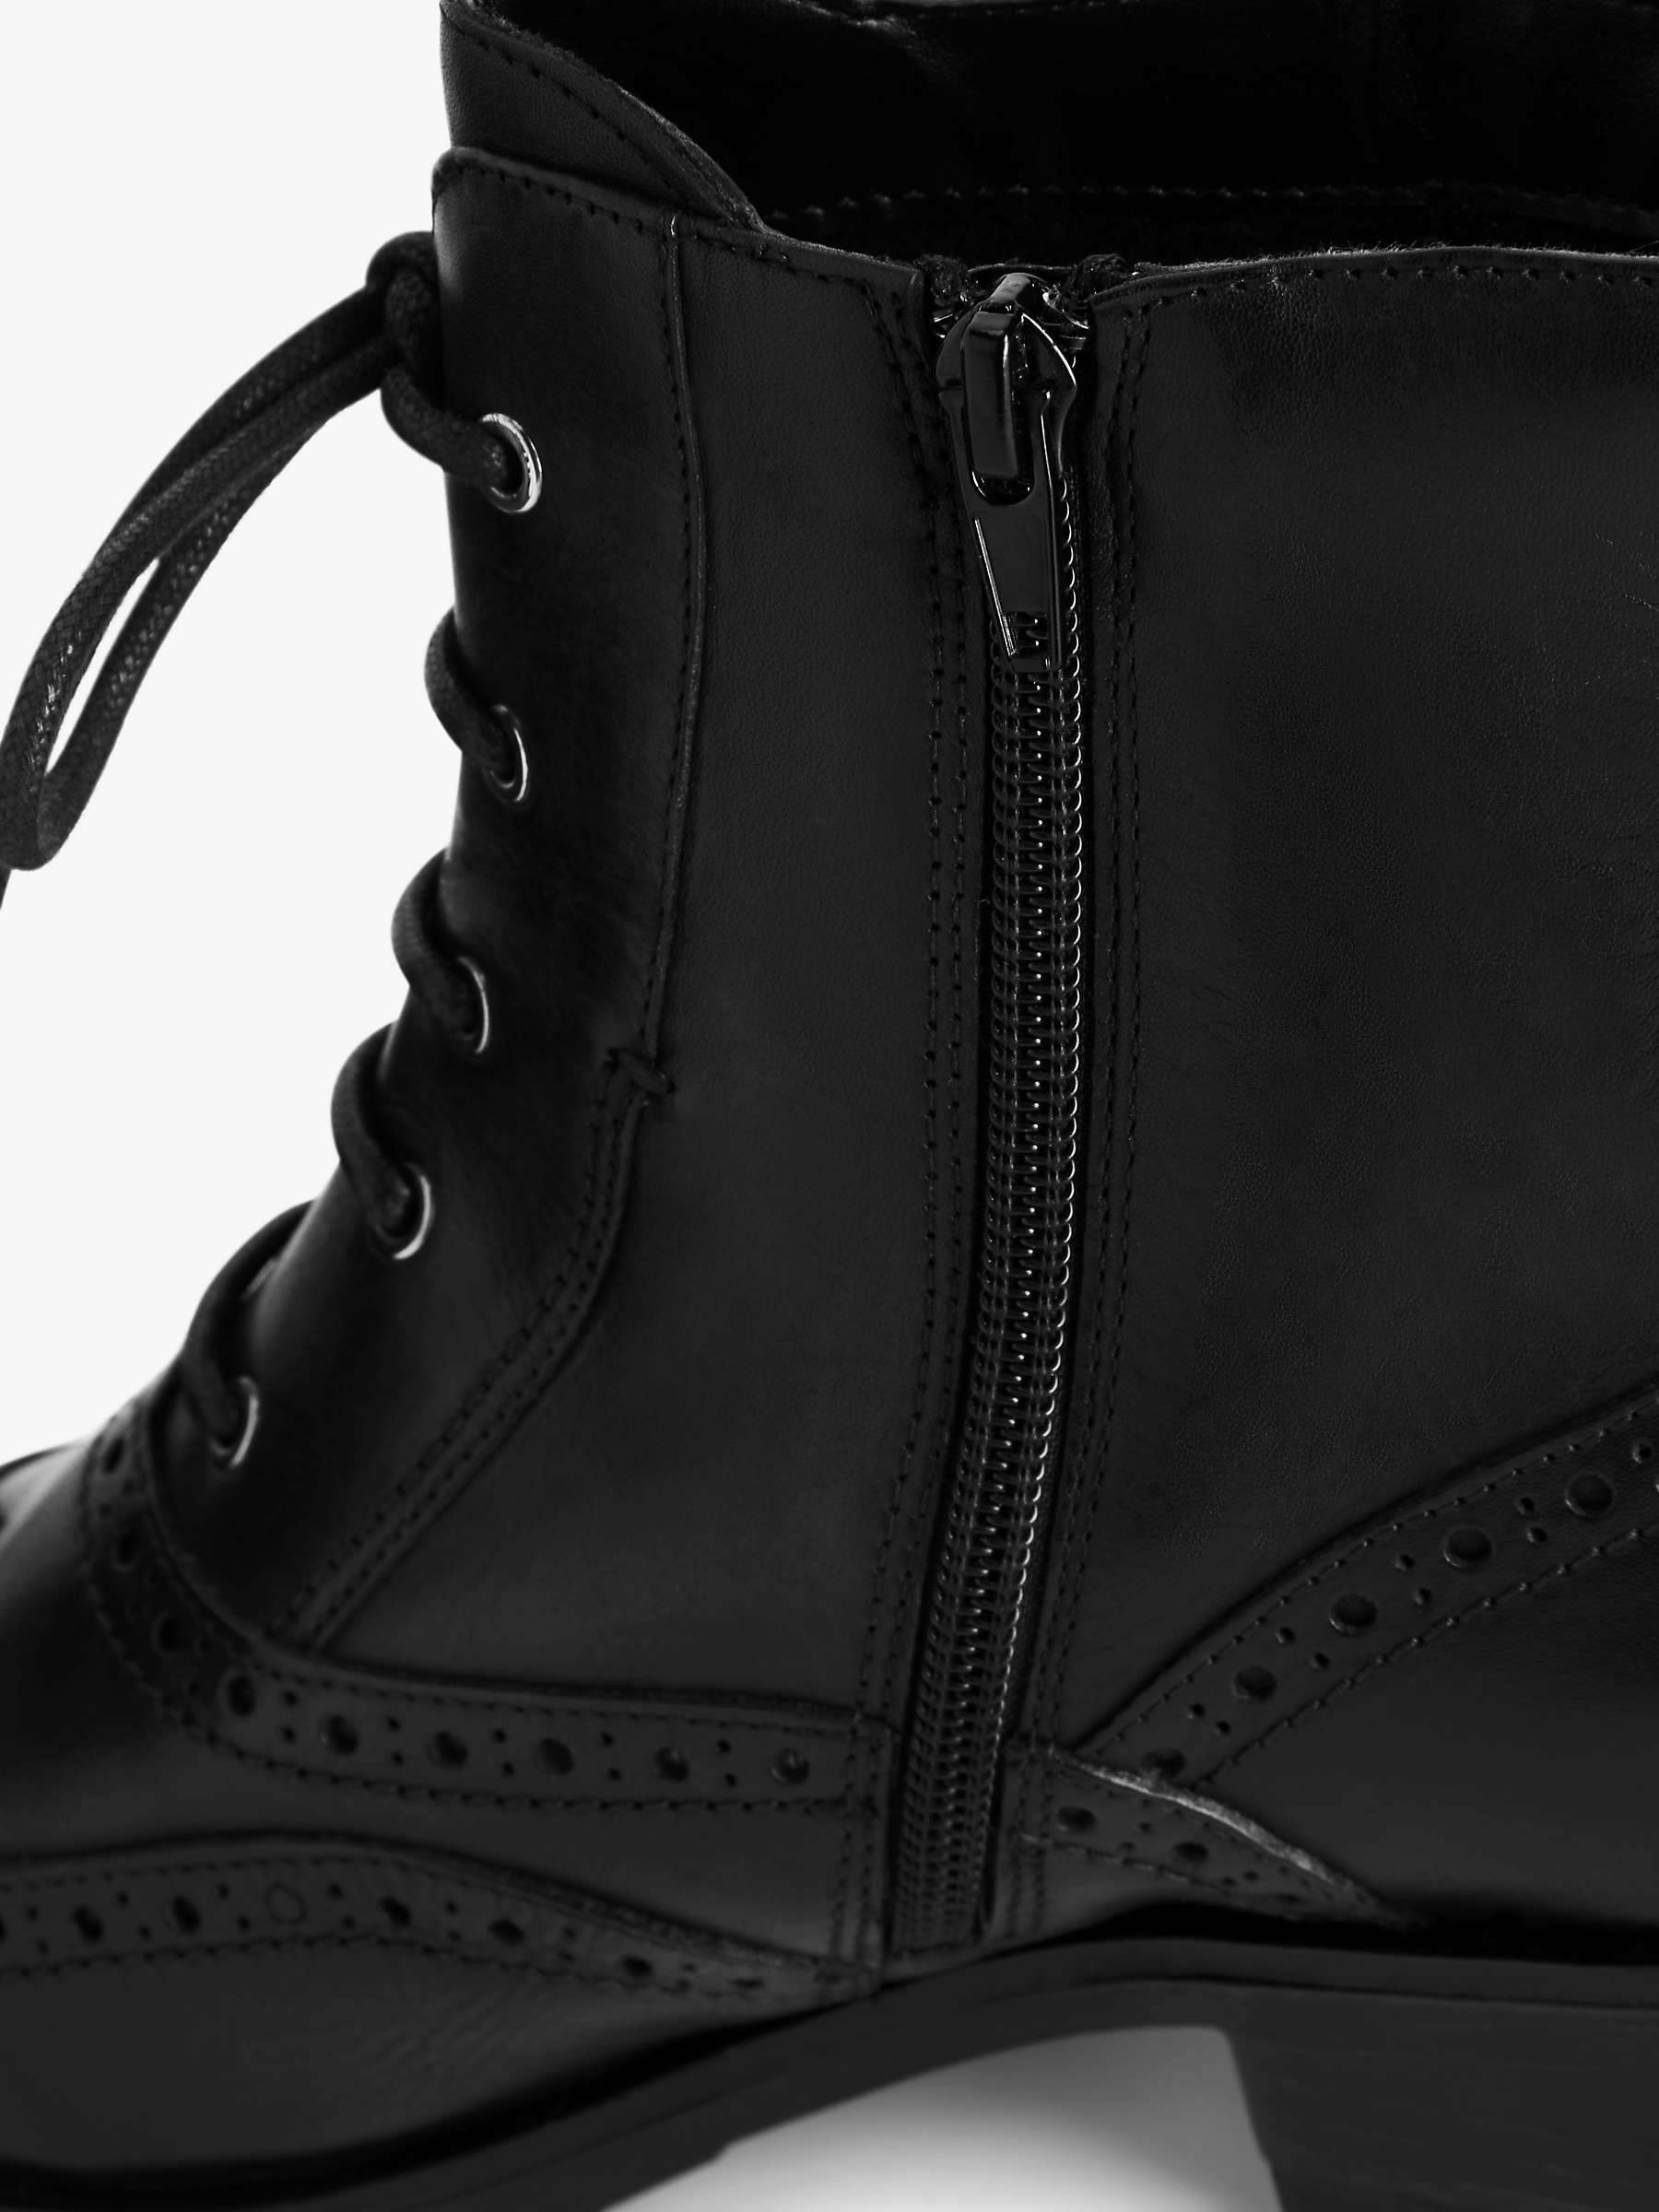 Buy John Lewis Camie Leather Brogue Detail Lace Up Ankle Boots Online at johnlewis.com